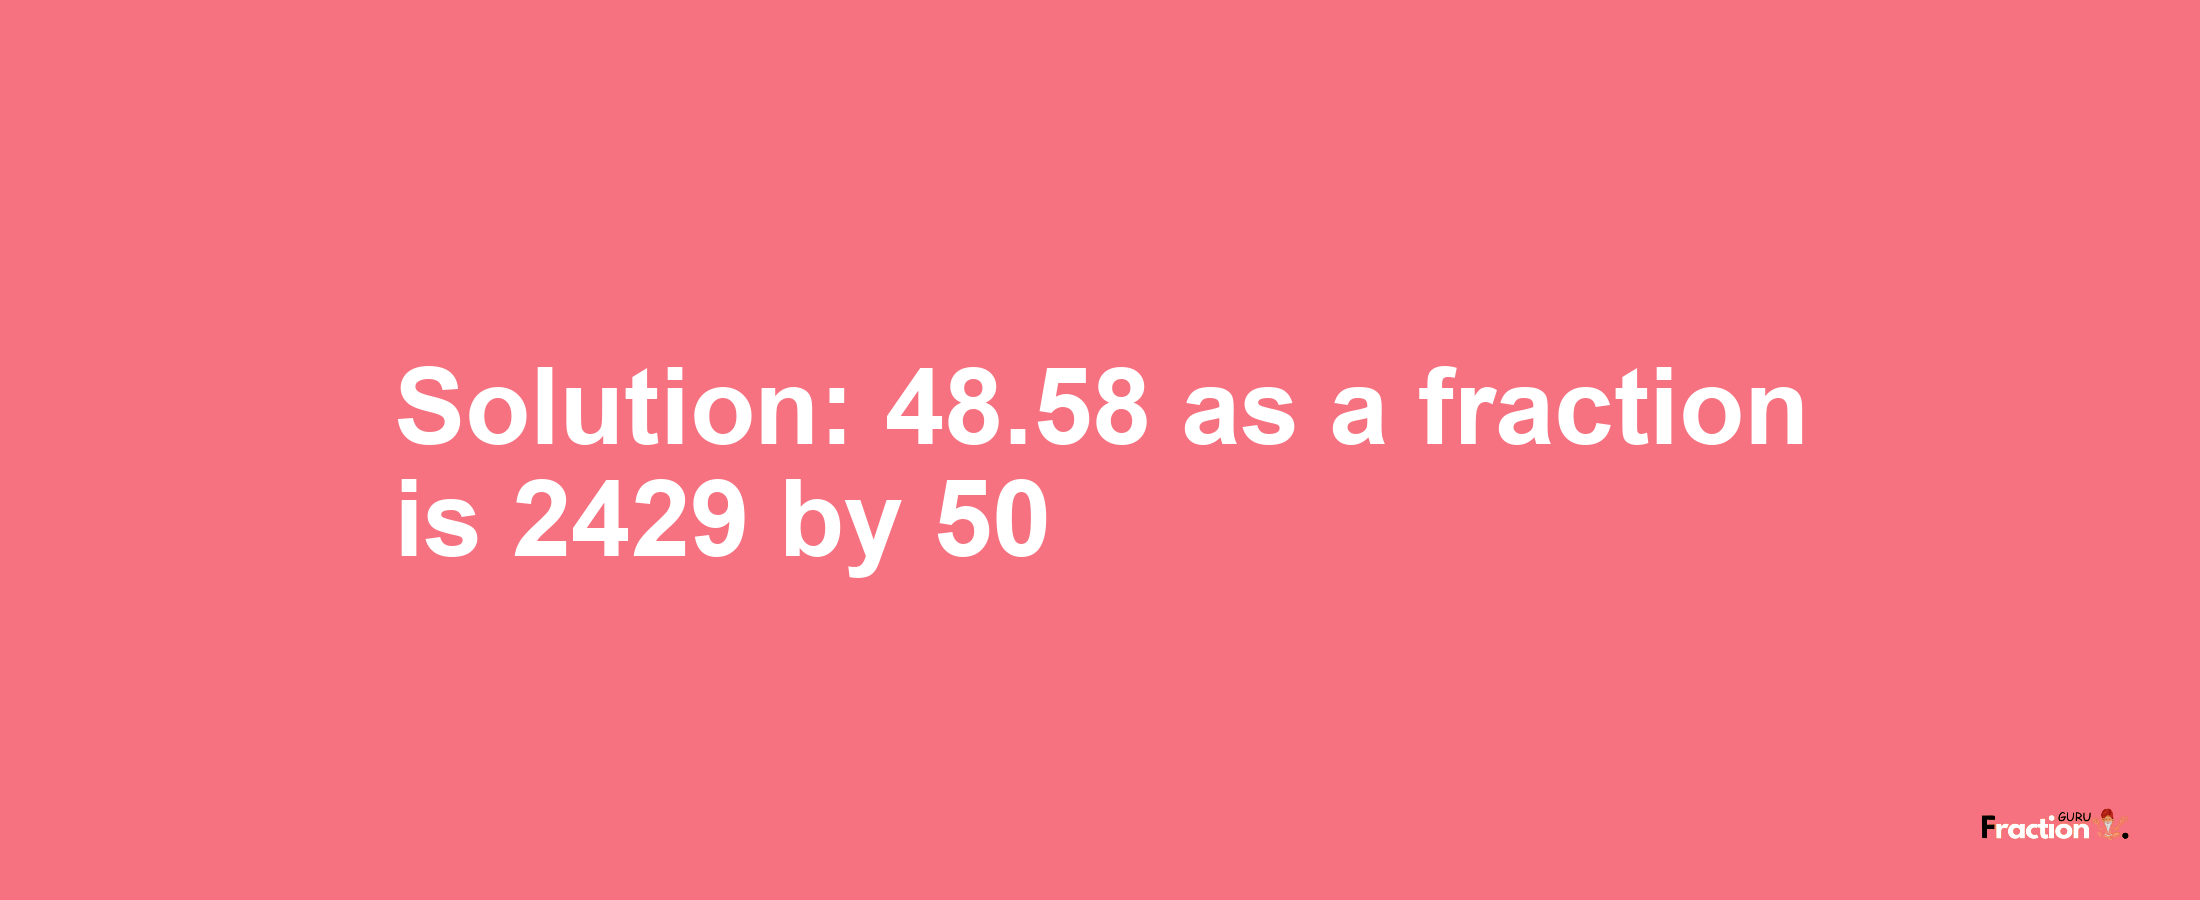 Solution:48.58 as a fraction is 2429/50